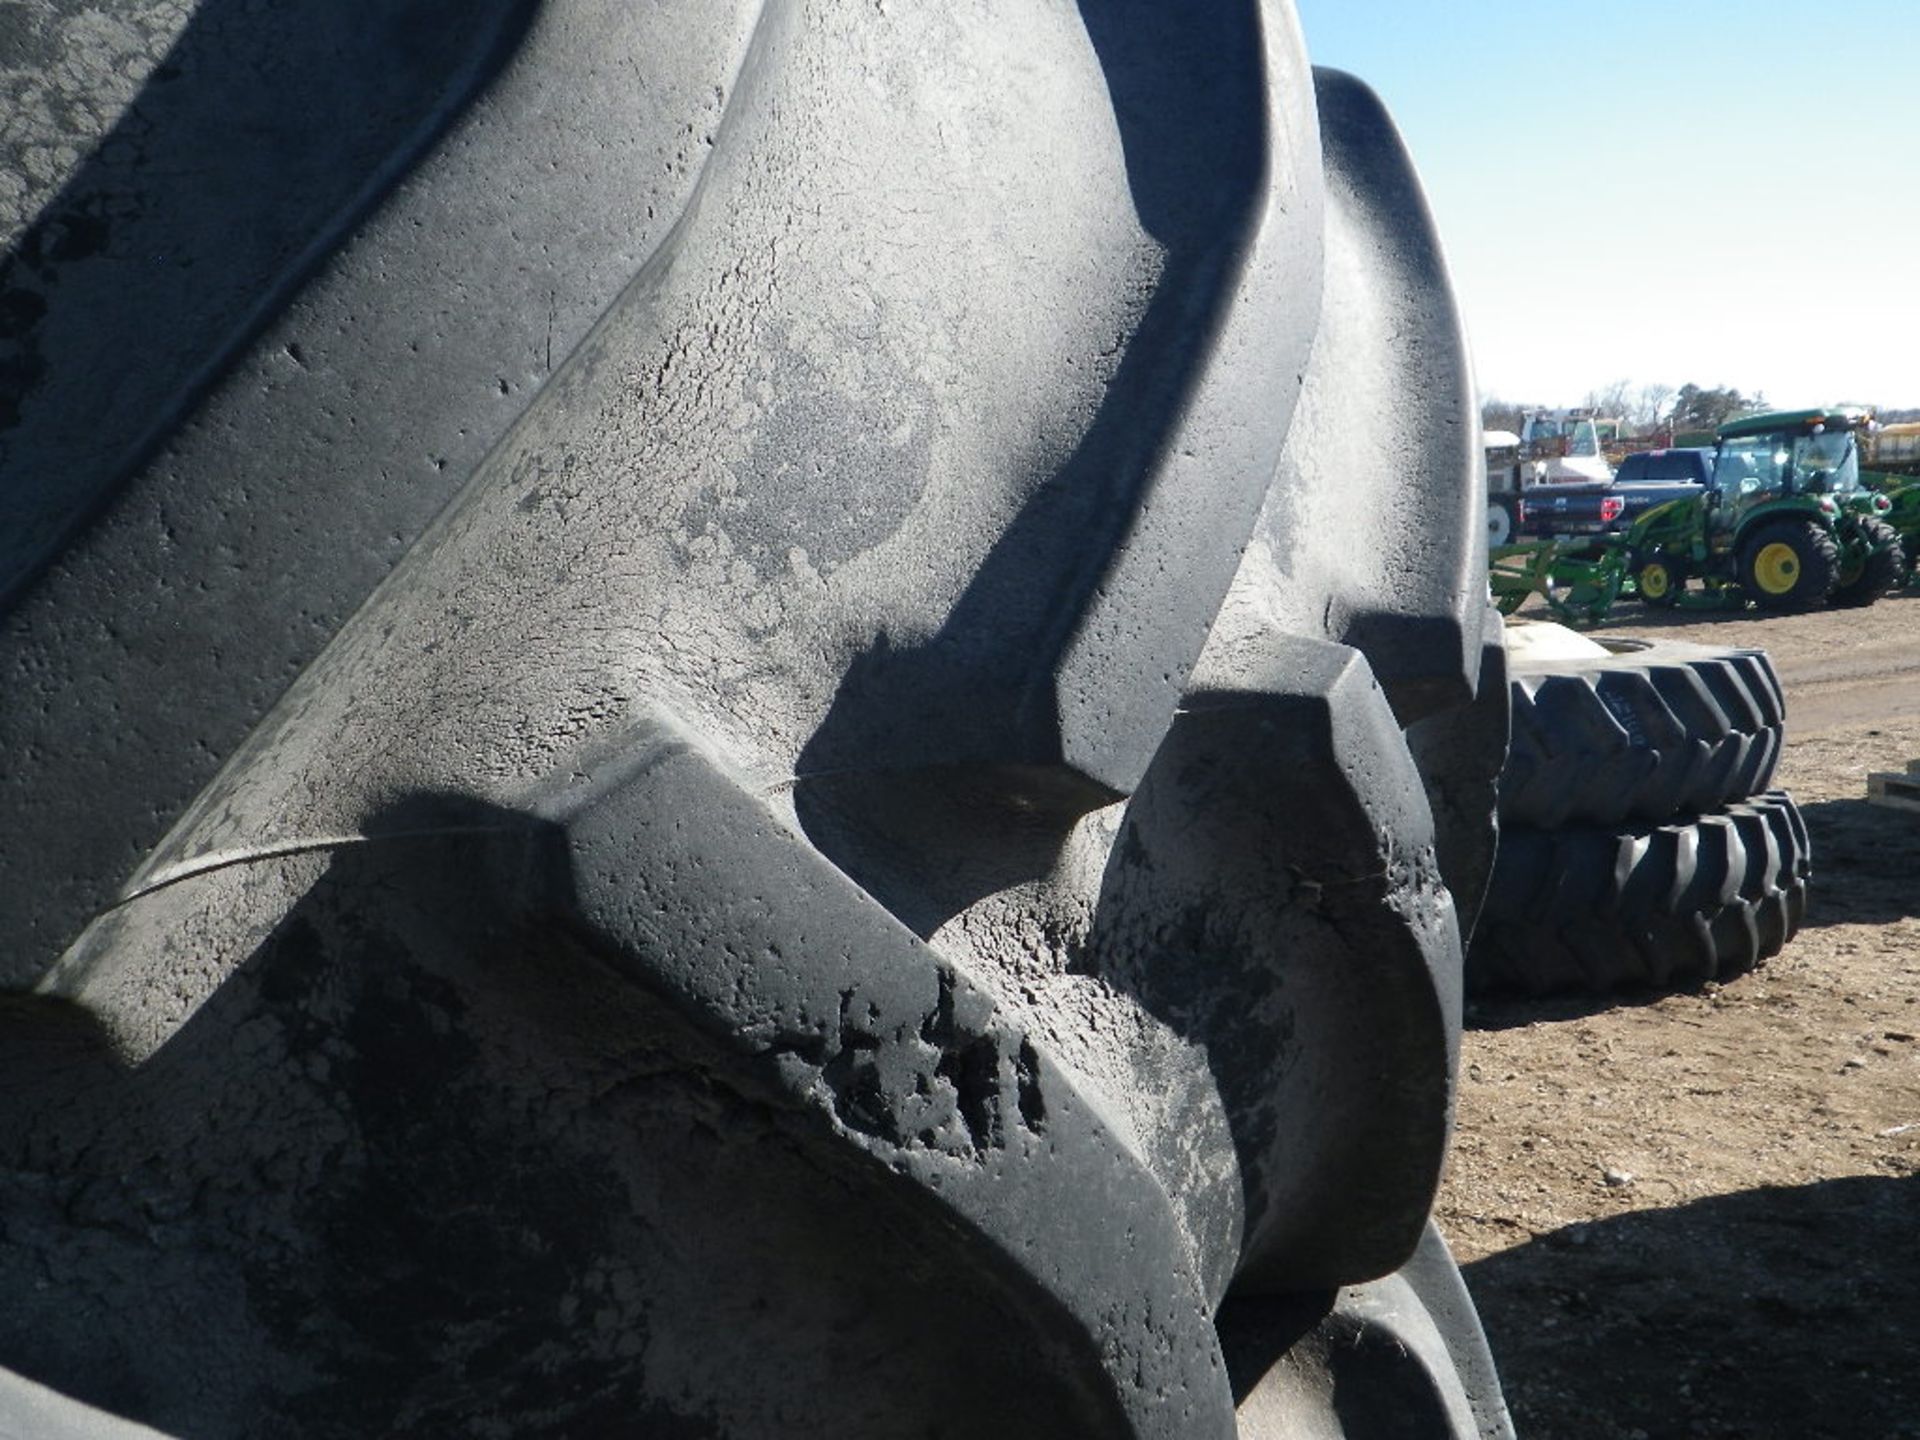 (30) 1 PAIR GY 800/70R38 SUPER TRACTION RADIAL COMBINE TIRES W/STUBBLE DAMAGE - TIRES ONLY - Image 2 of 4